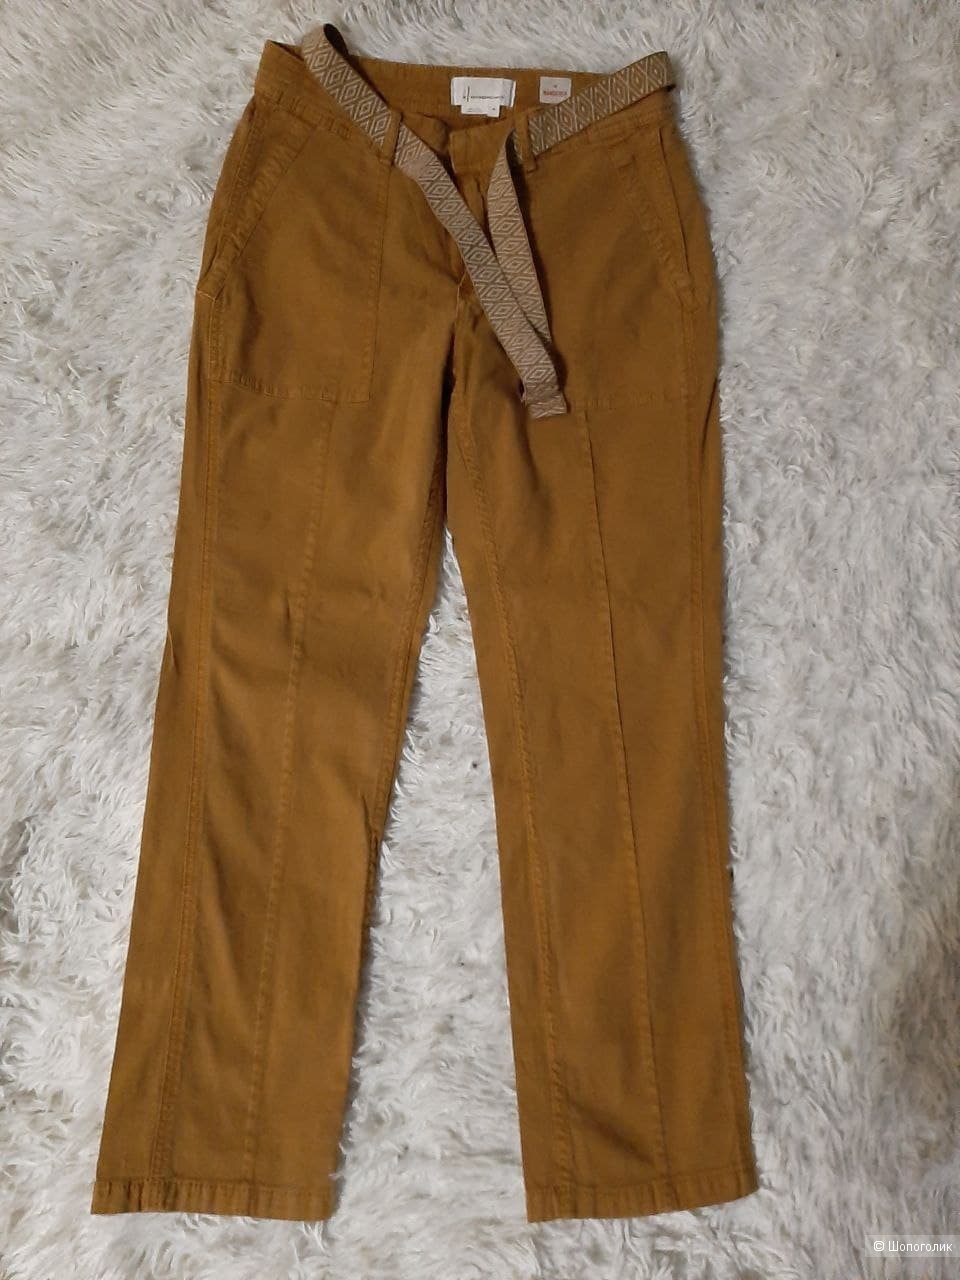 Anthropologie The Wanderer Utility Pants р 28